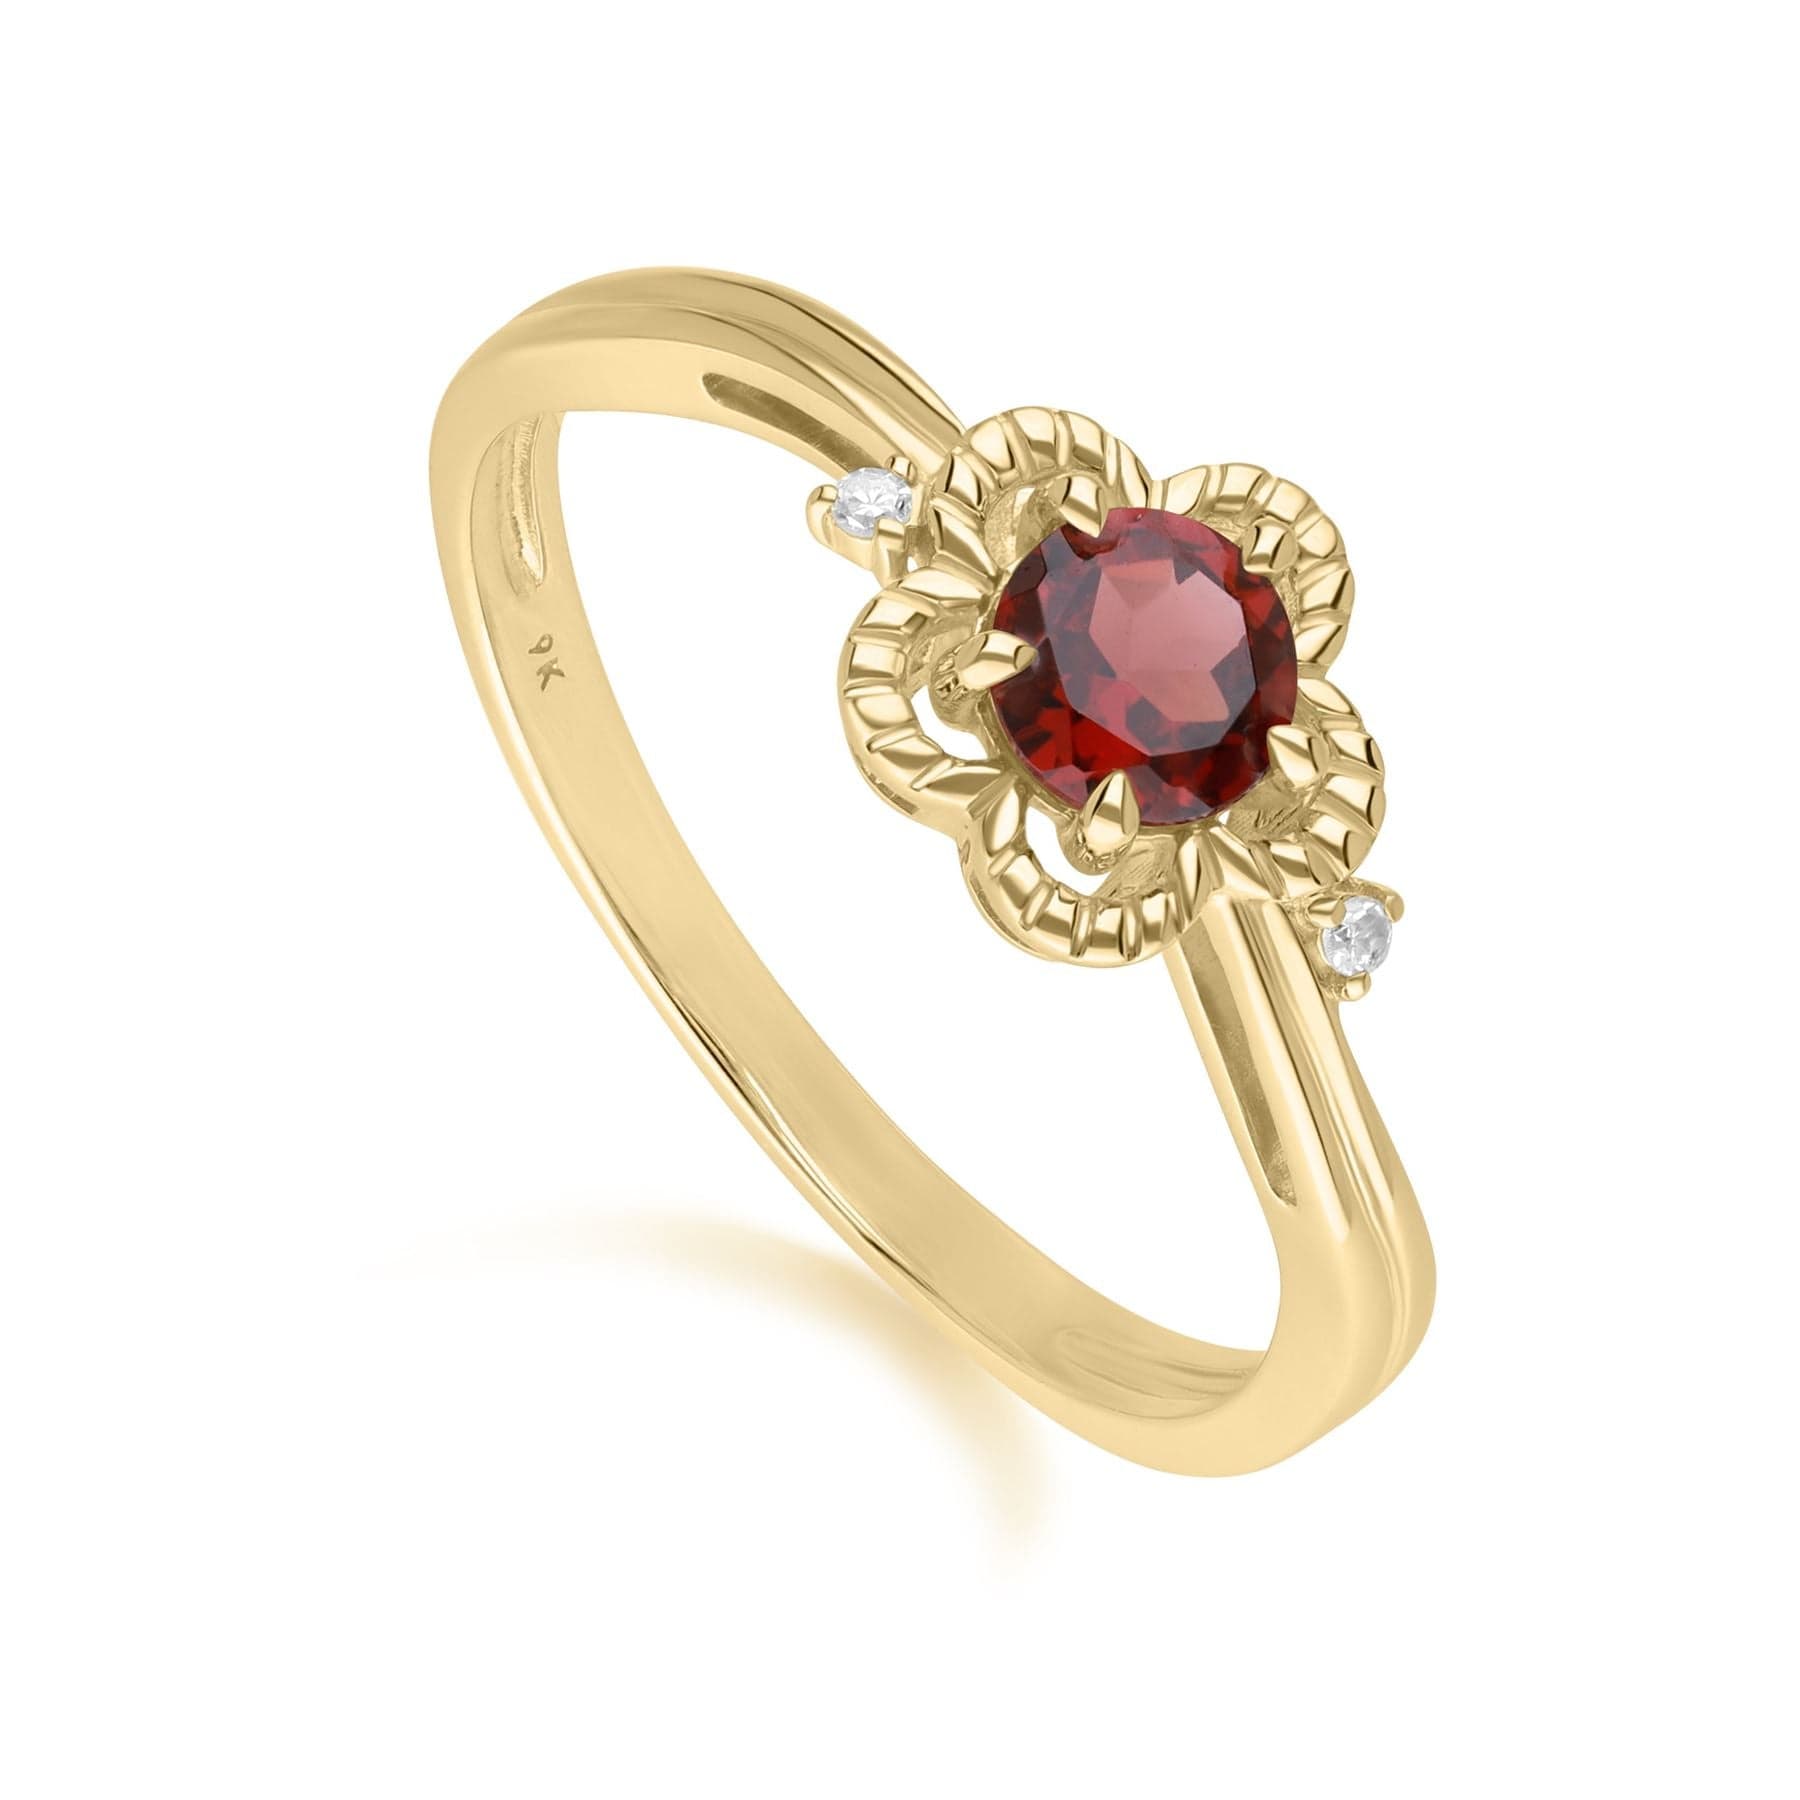 135R2049039 Floral Round Garnet & Diamond Ring in 9ct Yellow Gold 1